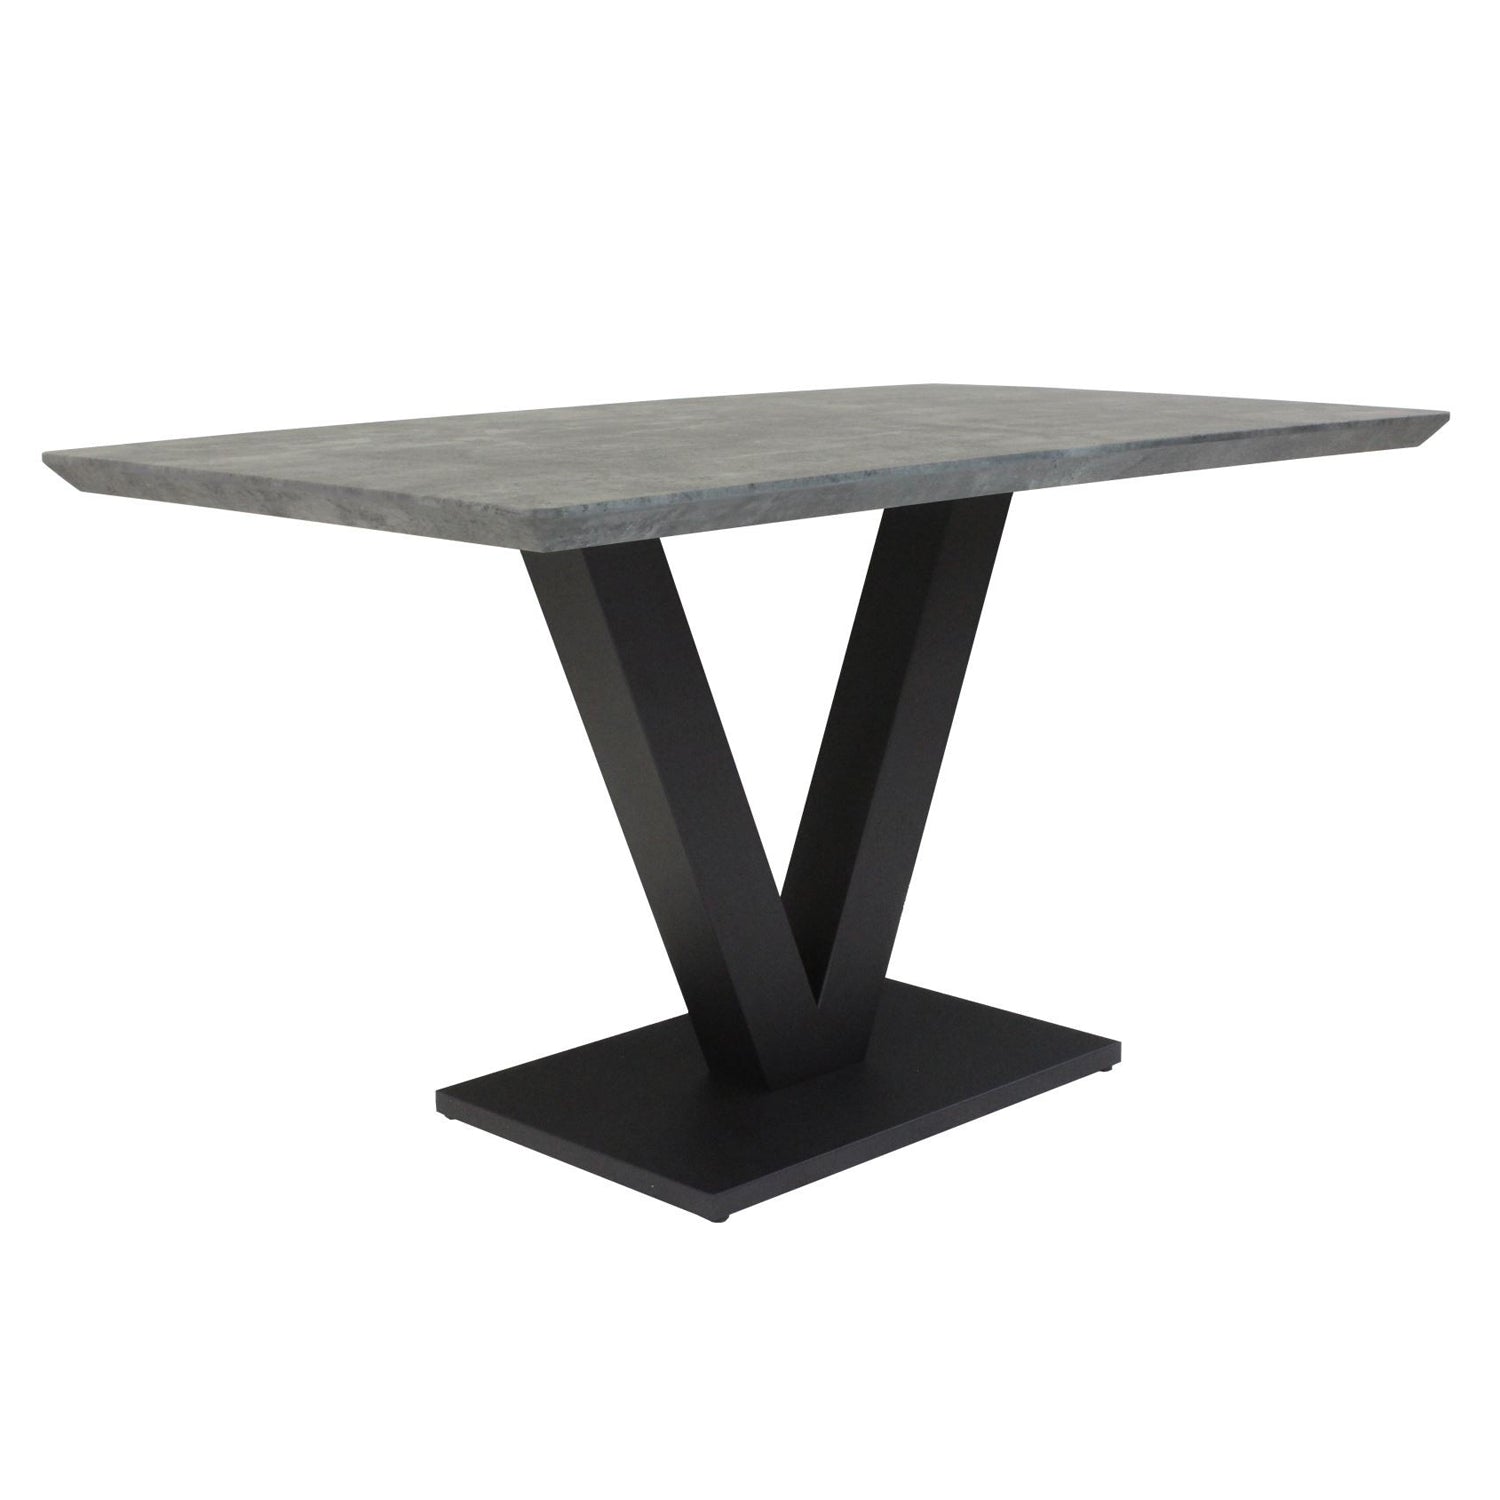 A Perfect Addition To Any Dining Room, Choose The Grayson Dining Table